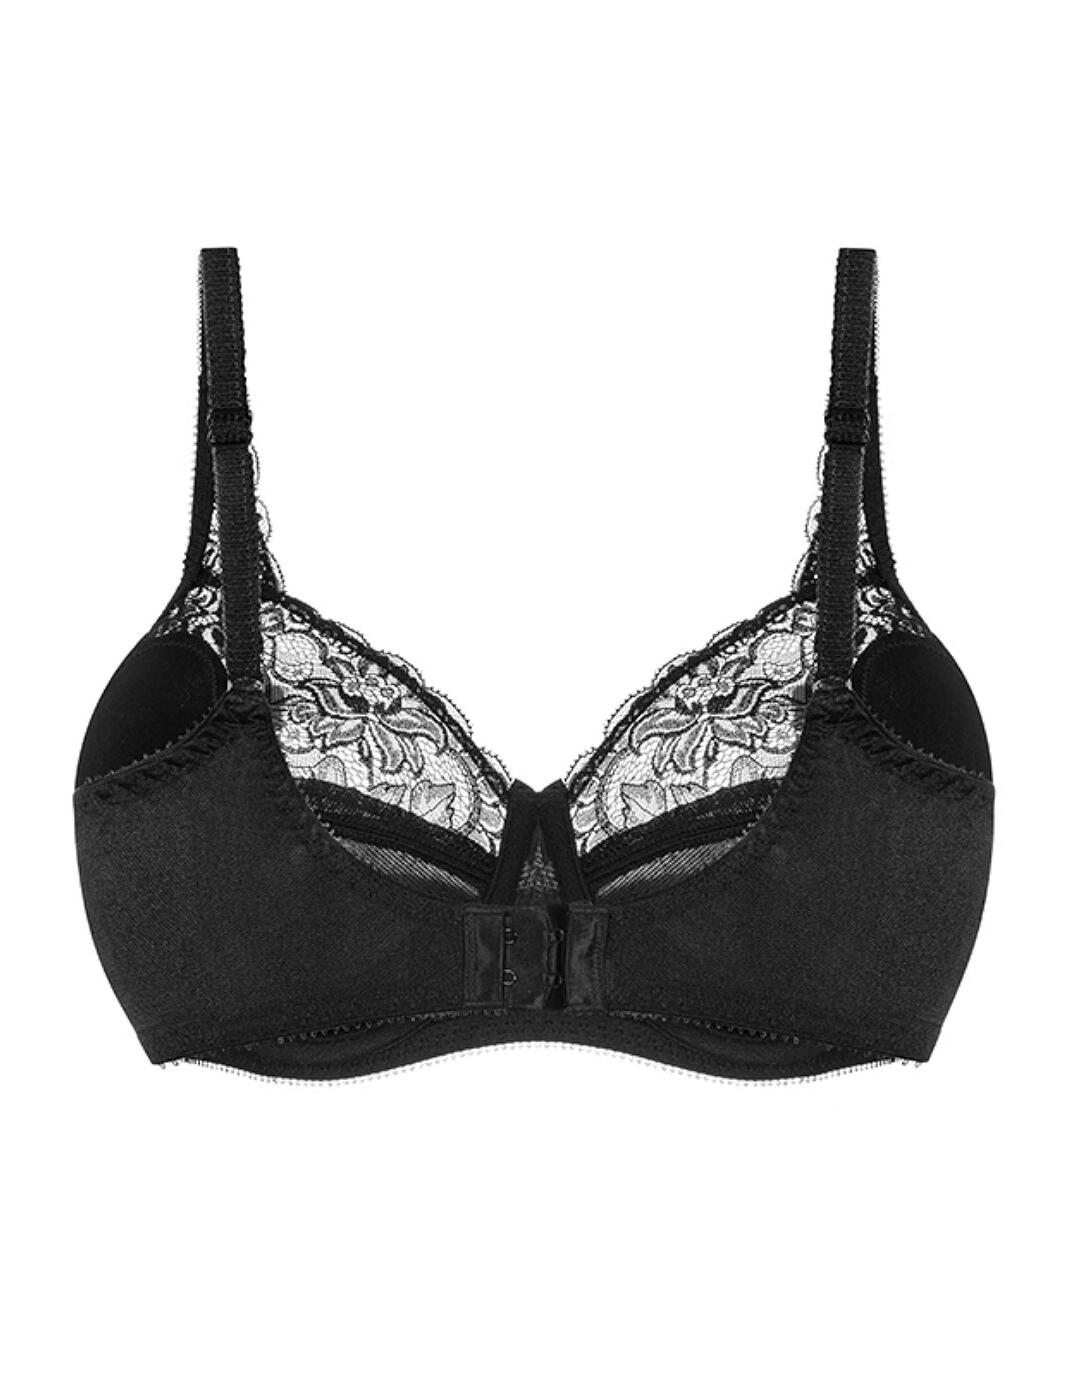 Charnos Superfit Full Cup Wired Black Bra - size 40E Myanmar